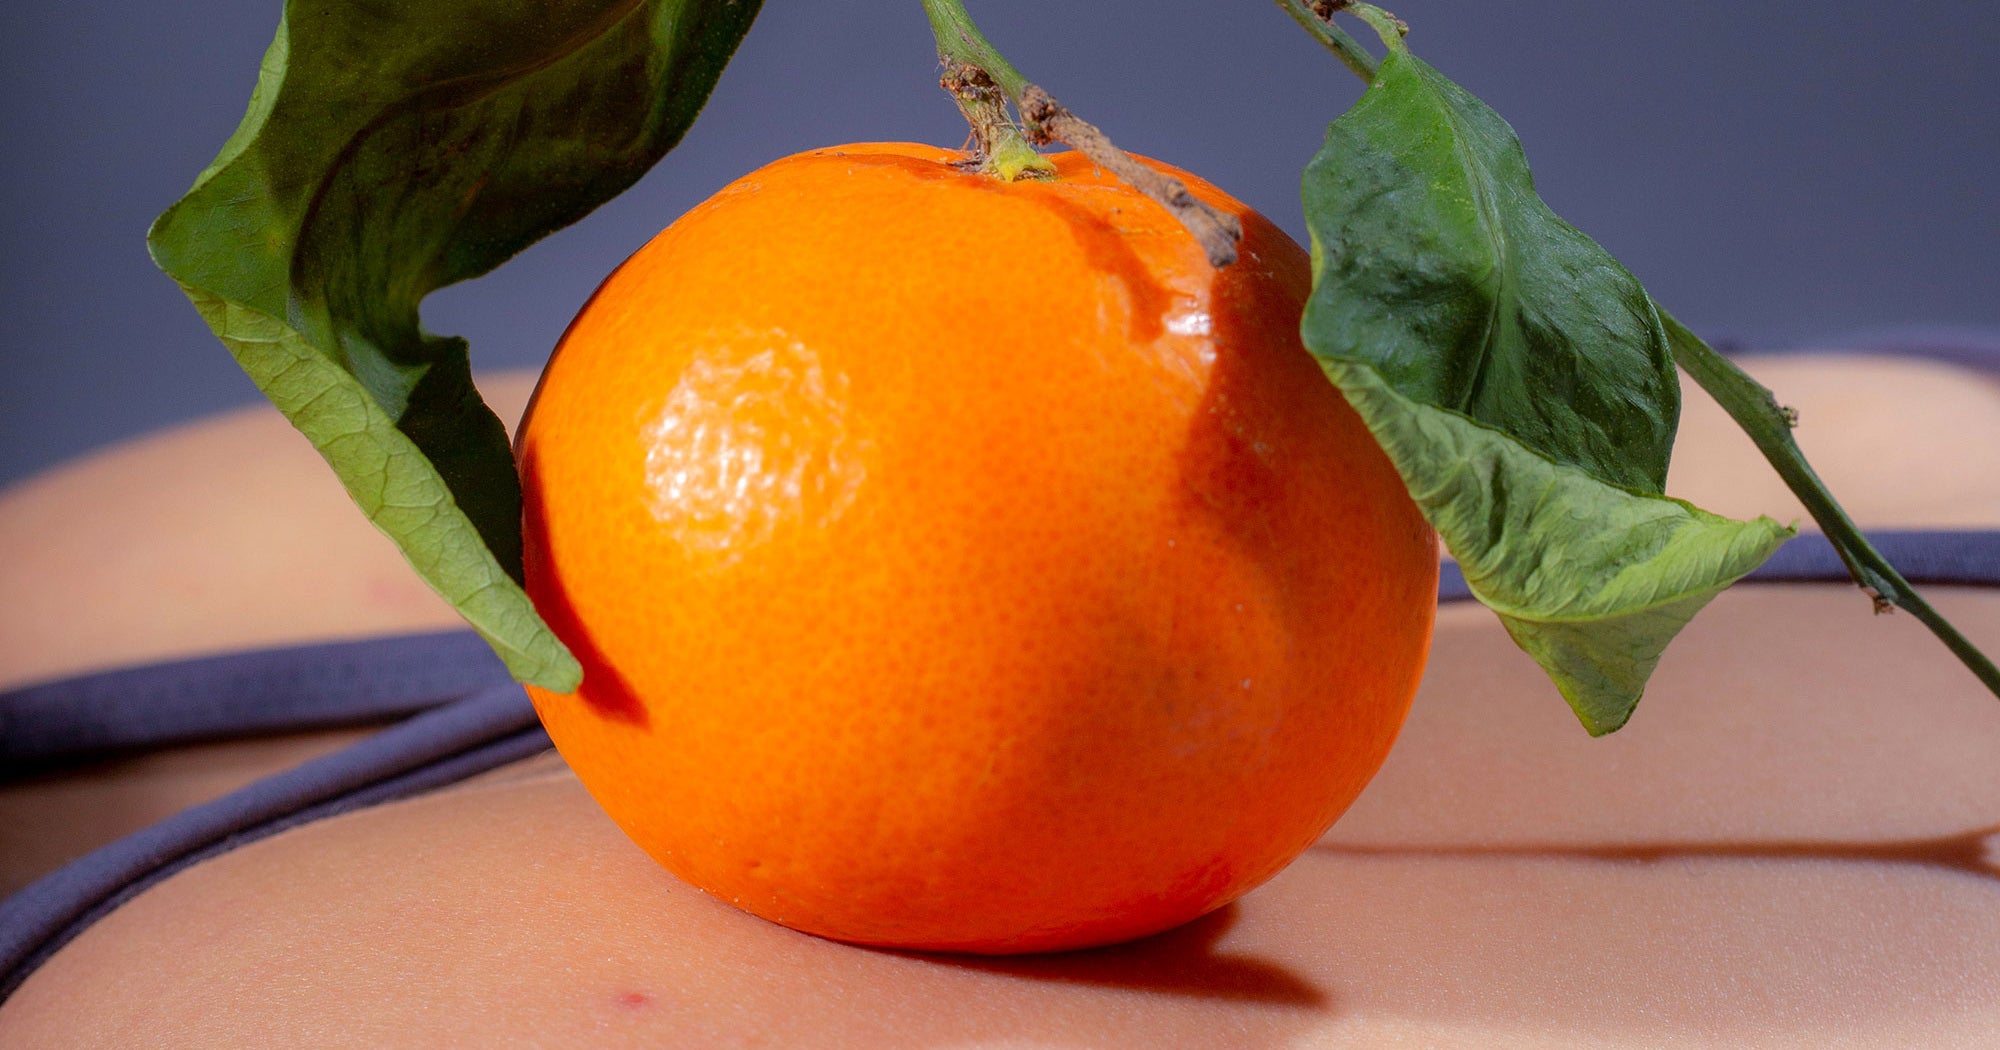 Is The Orange Peel Theory For Real? Experts Weigh In